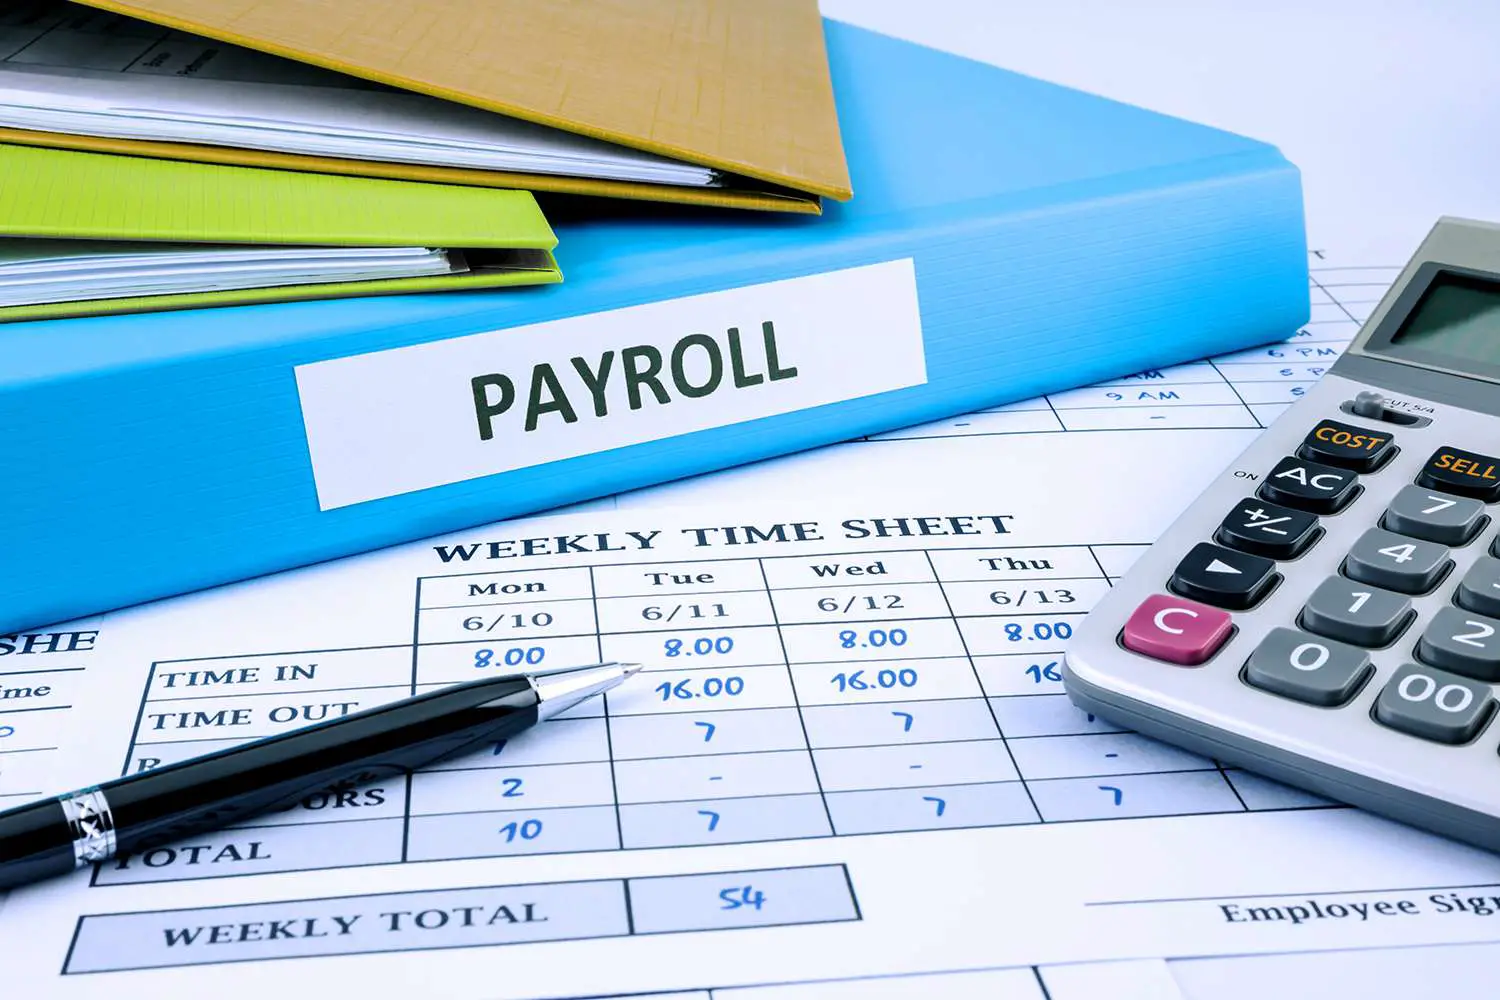 HR AND PAYROLL ADMINISTRATION